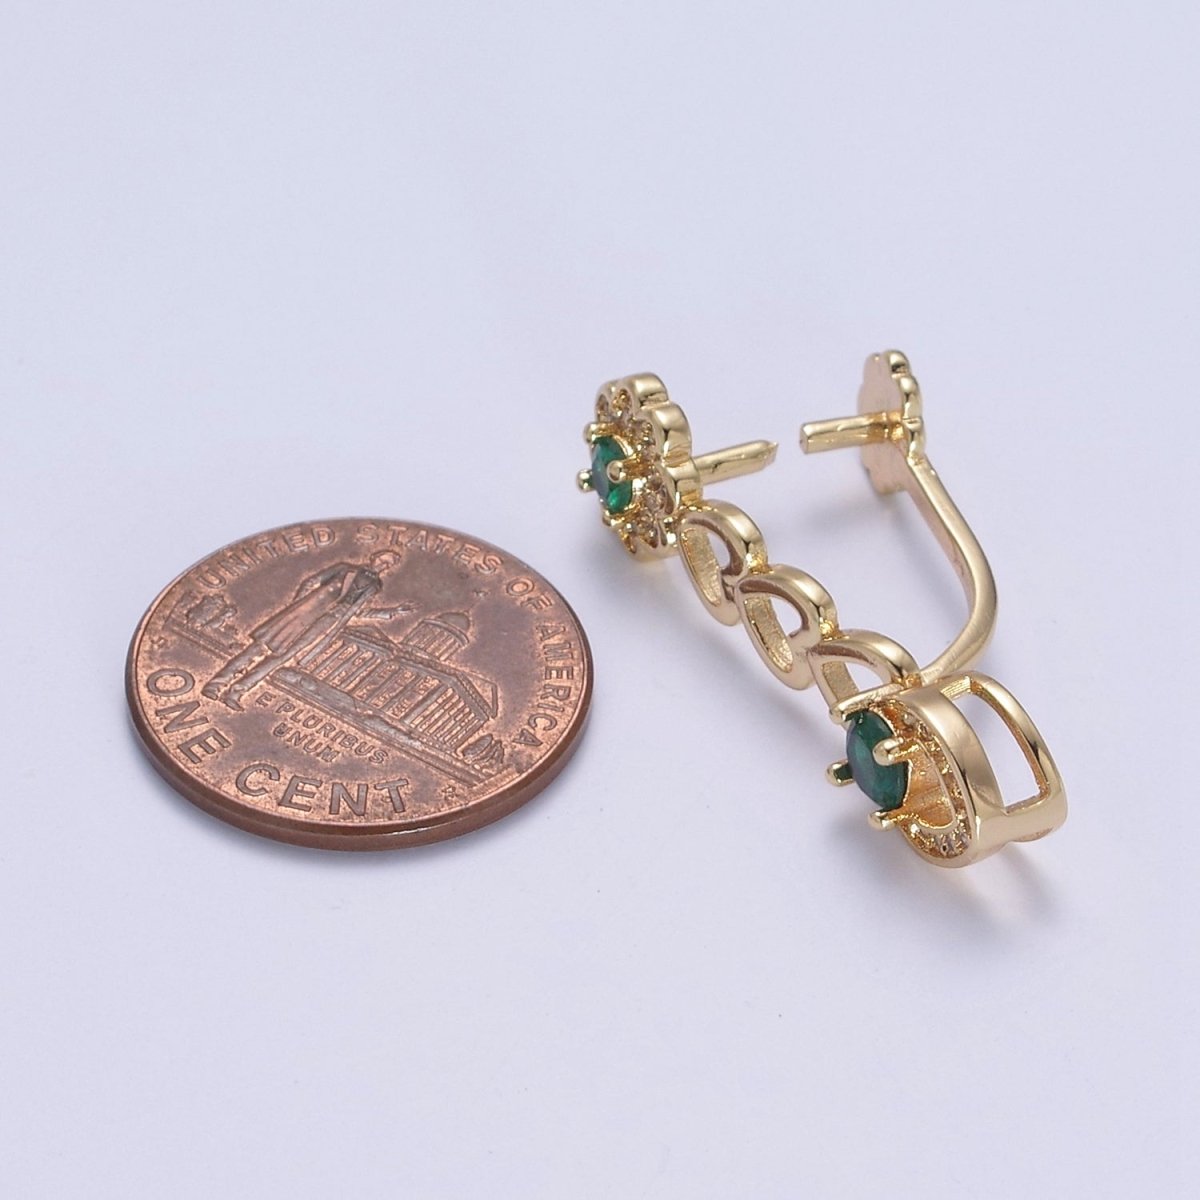 Pinch Bail, Nickel Free, 31.3x7.5mm, Pendant bail, 16K gold Filled brass Jewelry Gold bail, Charm bail, Ice pick with Micro Pave CZ Stone L-649 L-650 - DLUXCA